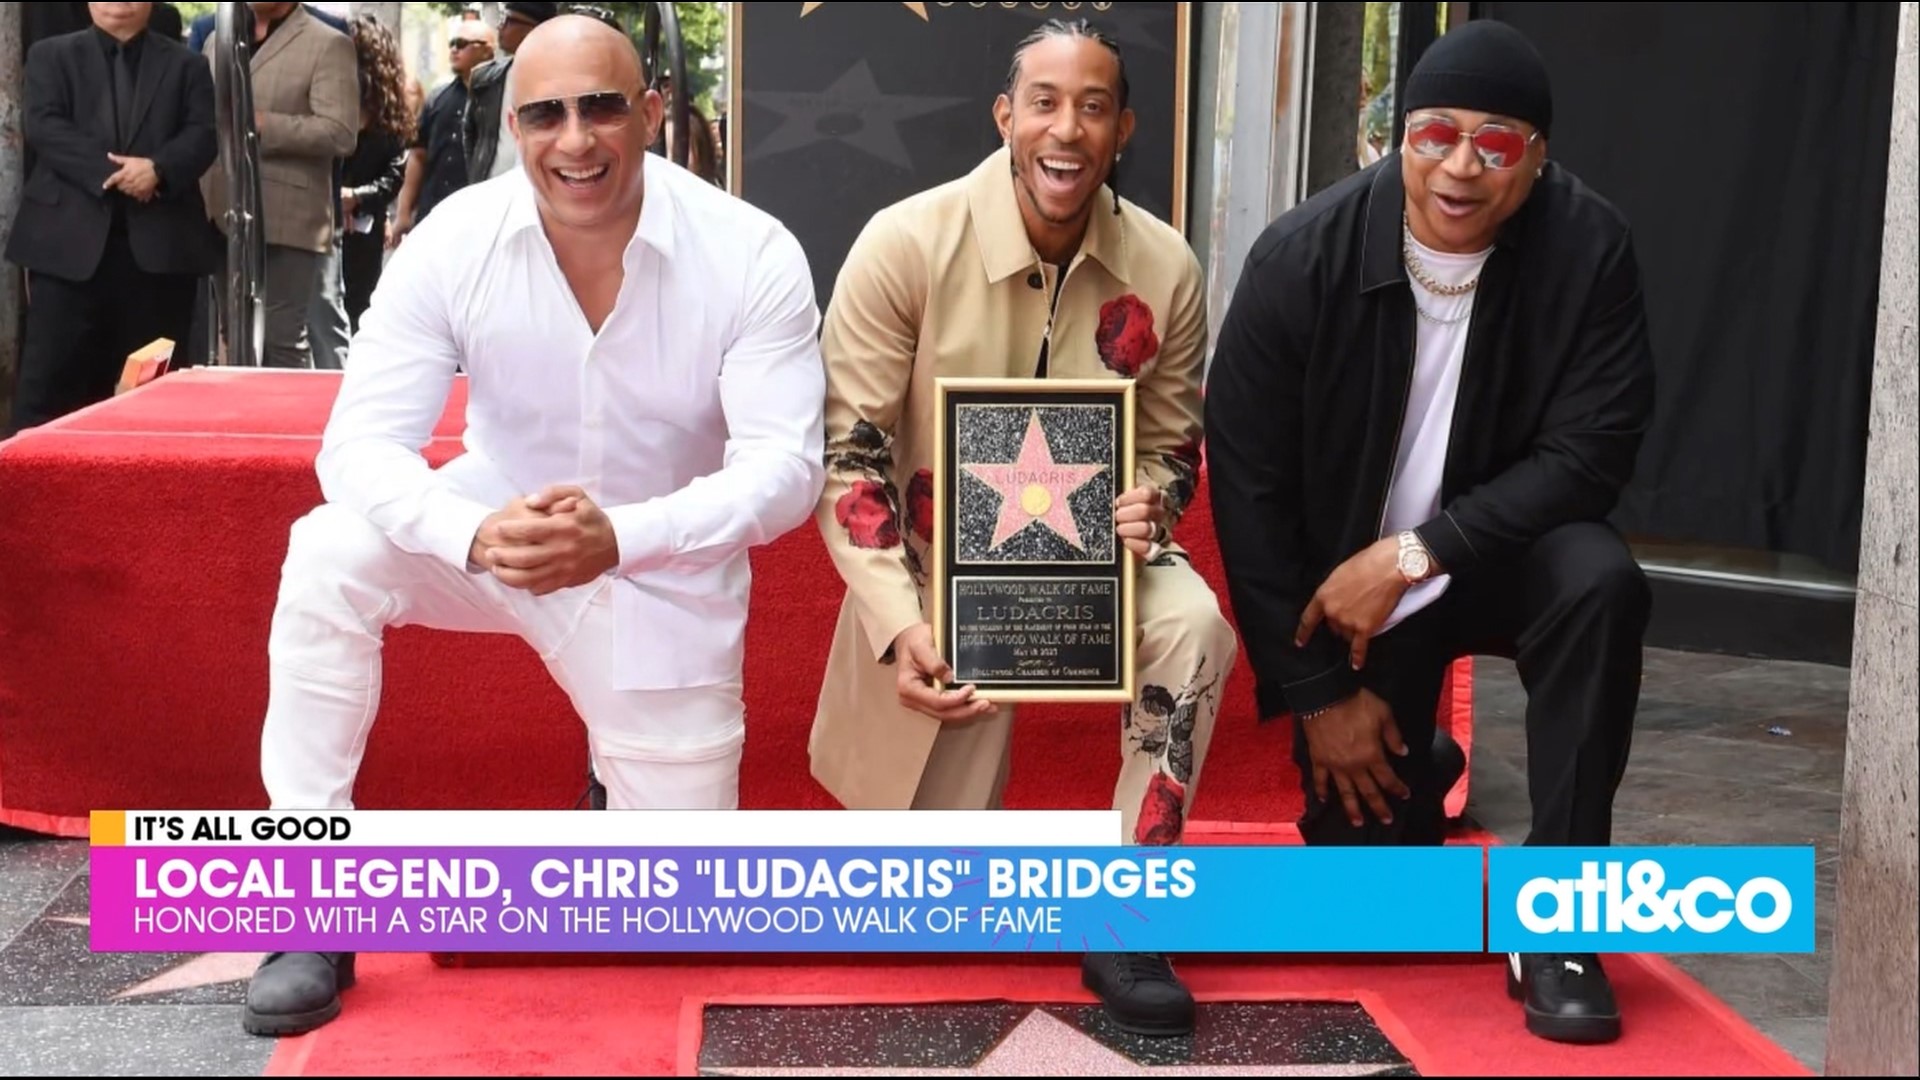 Atlanta rapper, actor, producer Chris "Ludacris" Bridges was honored this week with a star on the Hollywood Walk of Fame.